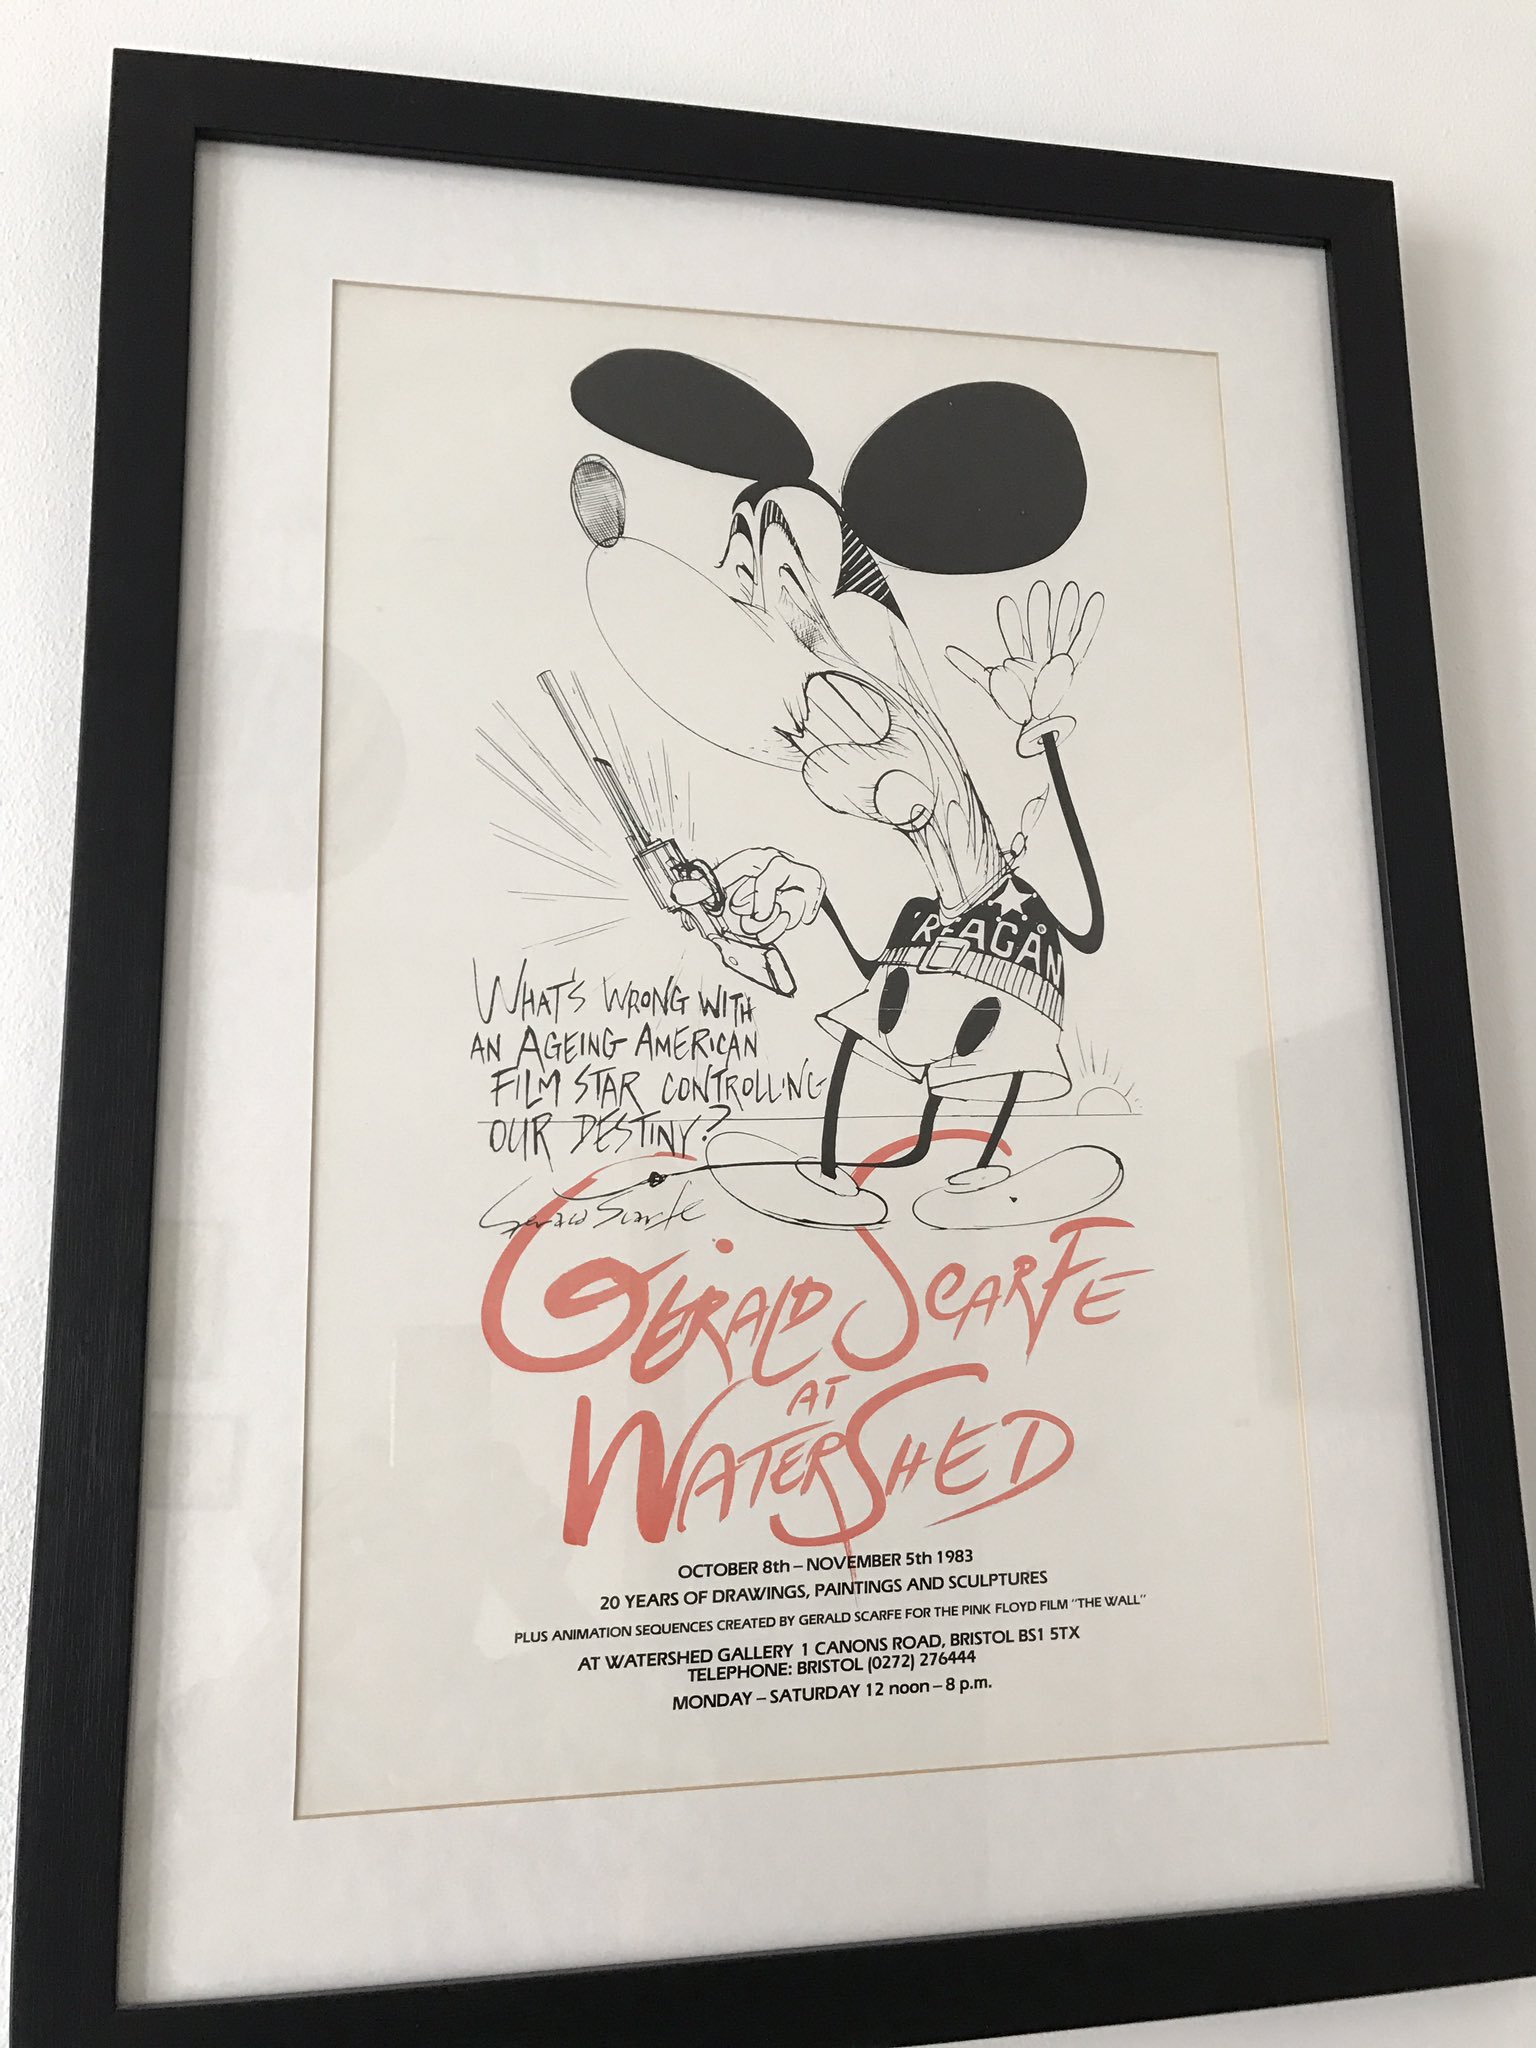 Happy birthday this poster from the Gerald scarfe exhibition hangs on my wall from 1983 